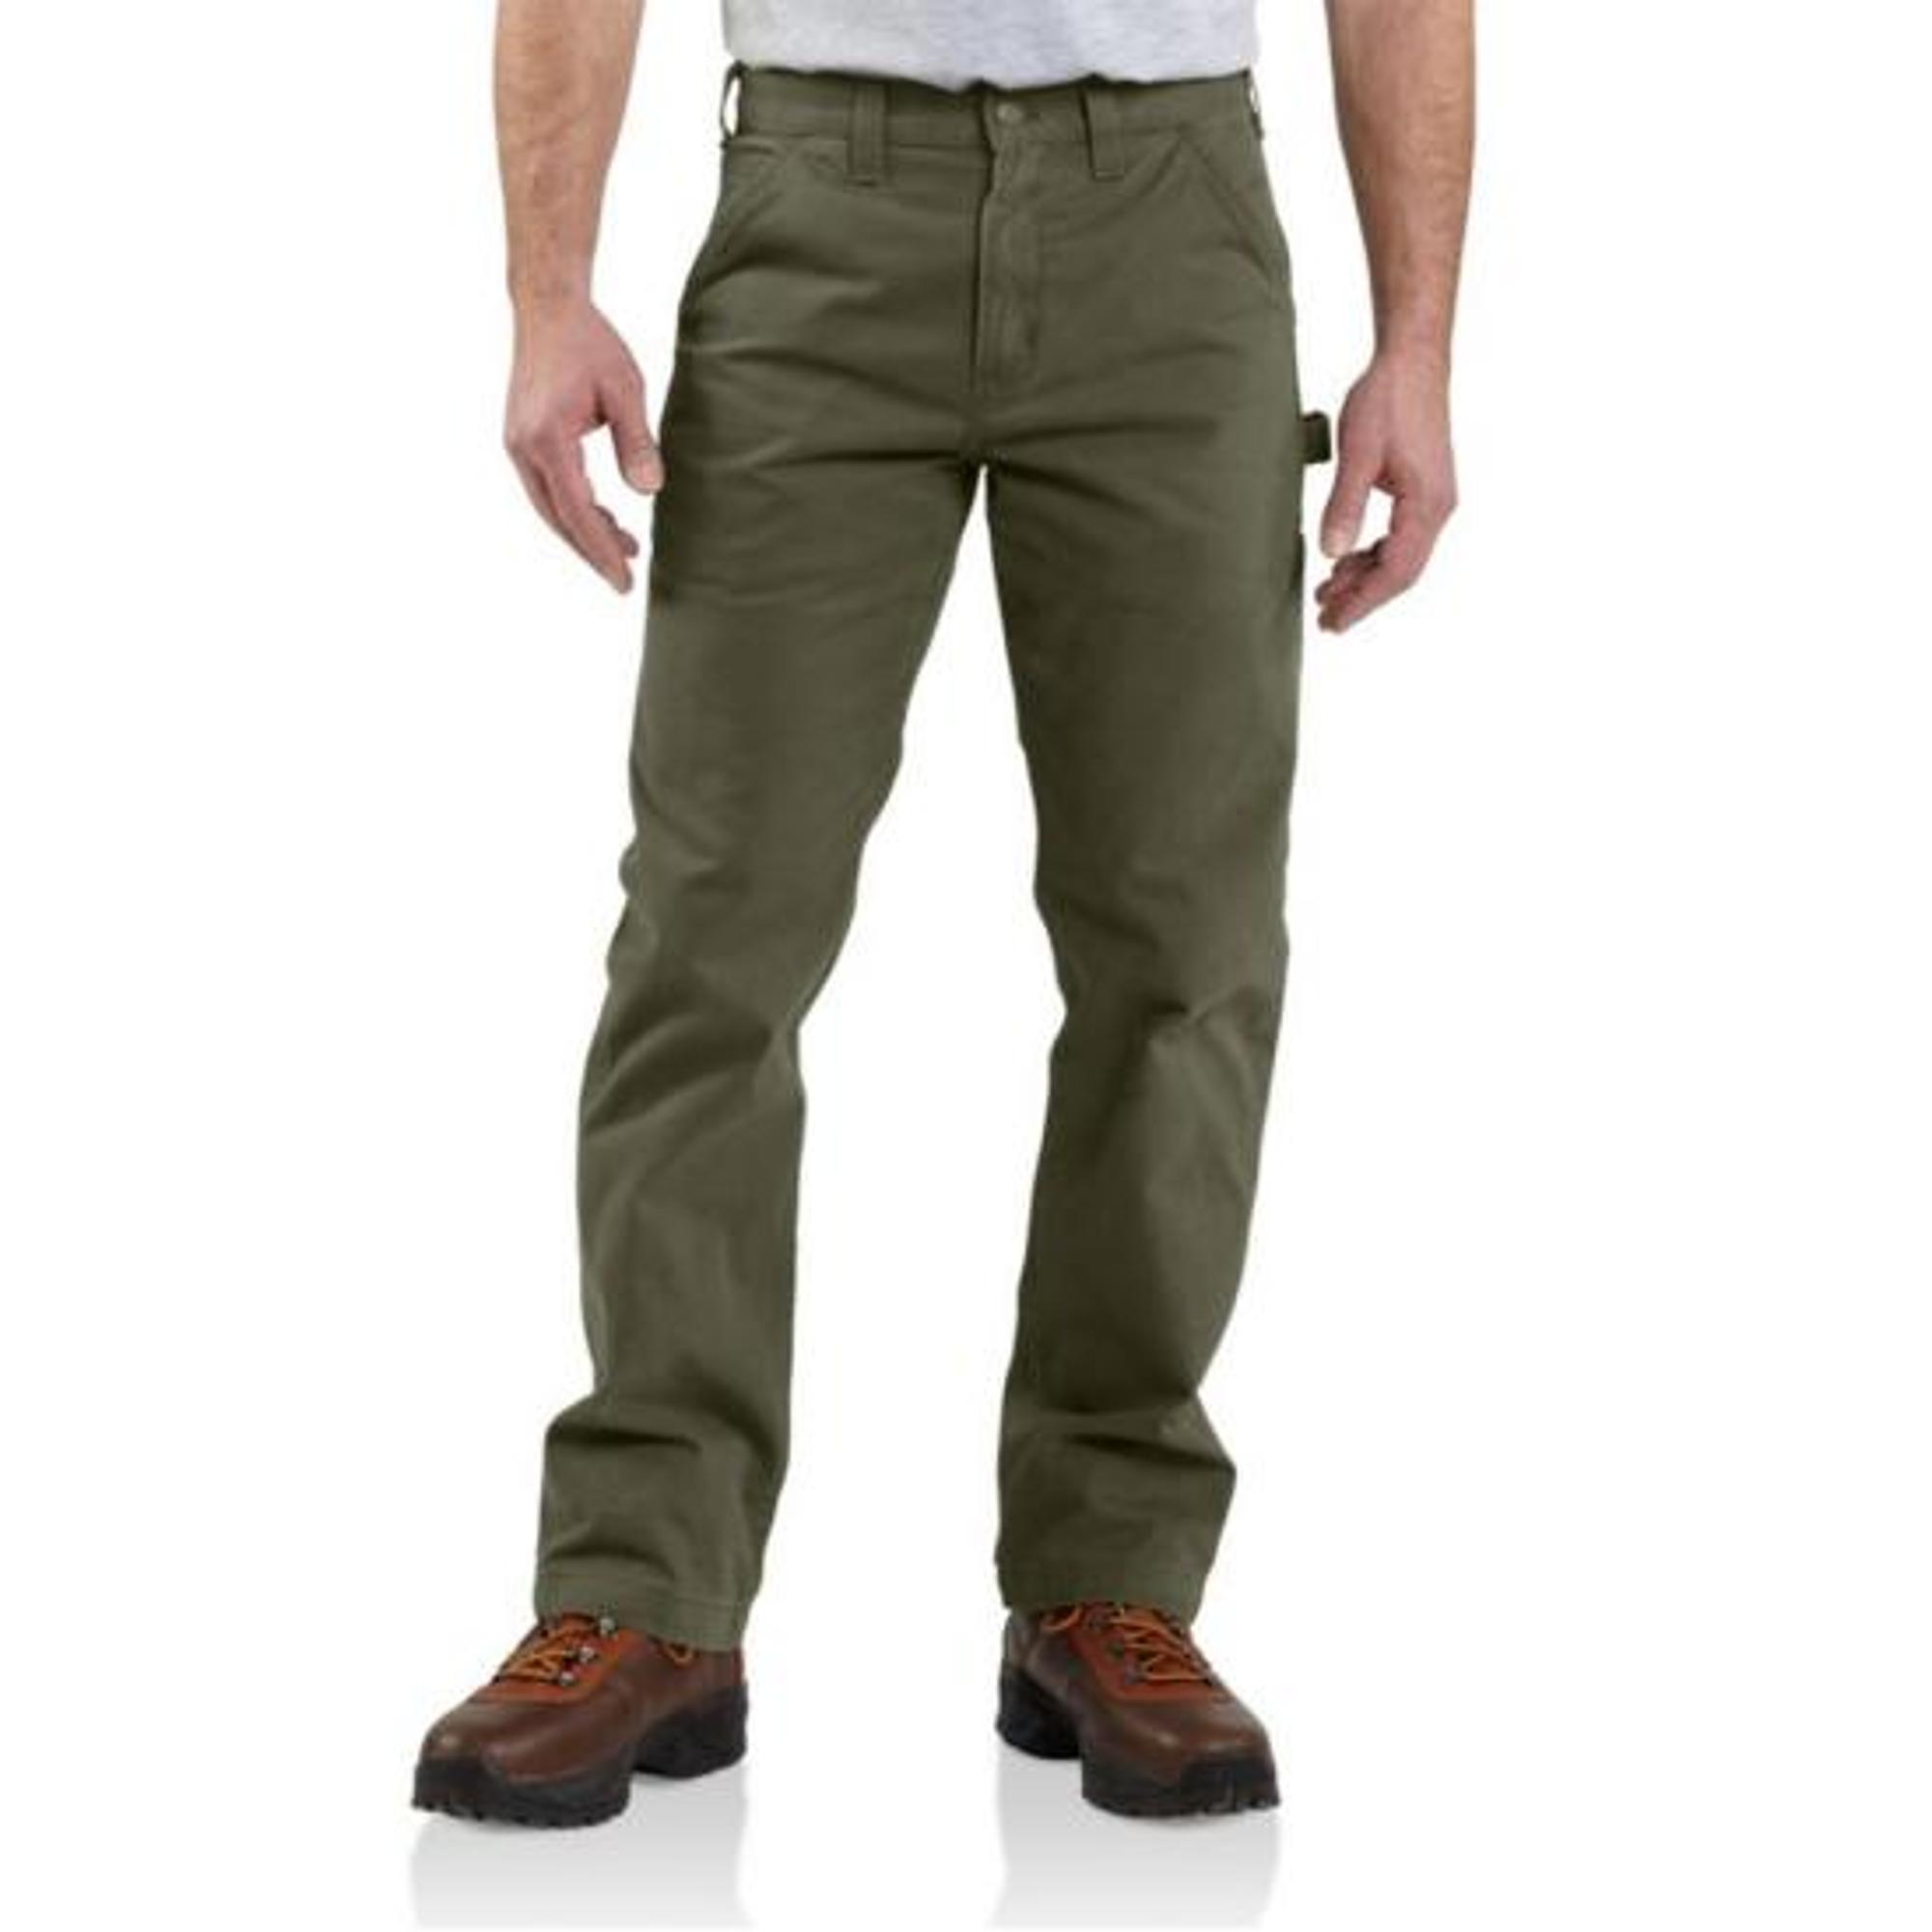 Men's Relaxed Fit Twill Utility Work Pant